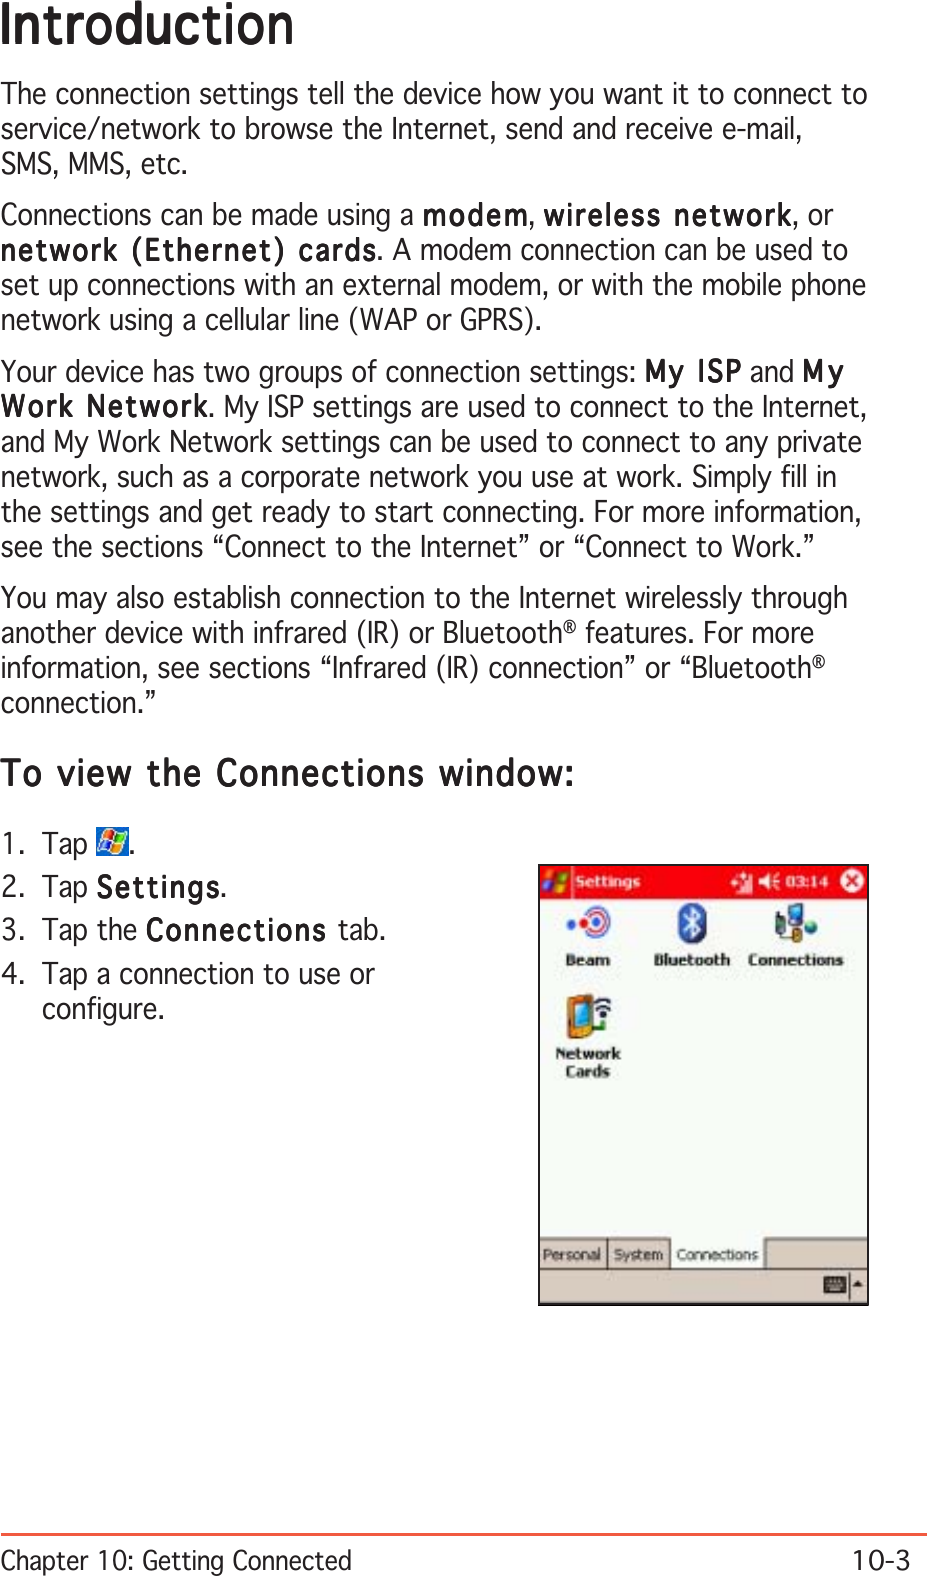 Chapter 10: Getting Connected10-3IntroductionIntroductionIntroductionIntroductionIntroductionThe connection settings tell the device how you want it to connect toservice/network to browse the Internet, send and receive e-mail,SMS, MMS, etc.Connections can be made using a modemmodemmodemmodemmodem, wireless networkwireless networkwireless networkwireless networkwireless network, ornetwork (Ethernet) cardsnetwork (Ethernet) cardsnetwork (Ethernet) cardsnetwork (Ethernet) cardsnetwork (Ethernet) cards. A modem connection can be used toset up connections with an external modem, or with the mobile phonenetwork using a cellular line (WAP or GPRS).Your device has two groups of connection settings: My ISPMy ISPMy ISPMy ISPMy ISP and MyMyMyMyMyWork NetworkWork NetworkWork NetworkWork NetworkWork Network. My ISP settings are used to connect to the Internet,and My Work Network settings can be used to connect to any privatenetwork, such as a corporate network you use at work. Simply fill inthe settings and get ready to start connecting. For more information,see the sections “Connect to the Internet” or “Connect to Work.”You may also establish connection to the Internet wirelessly throughanother device with infrared (IR) or Bluetooth® features. For moreinformation, see sections “Infrared (IR) connection” or “Bluetooth®connection.”To view the Connections window:To view the Connections window:To view the Connections window:To view the Connections window:To view the Connections window:1. Tap  .2. Tap SettingsSettingsSettingsSettingsSettings.3. Tap the ConnectionsConnectionsConnectionsConnectionsConnections tab.4. Tap a connection to use orconfigure.